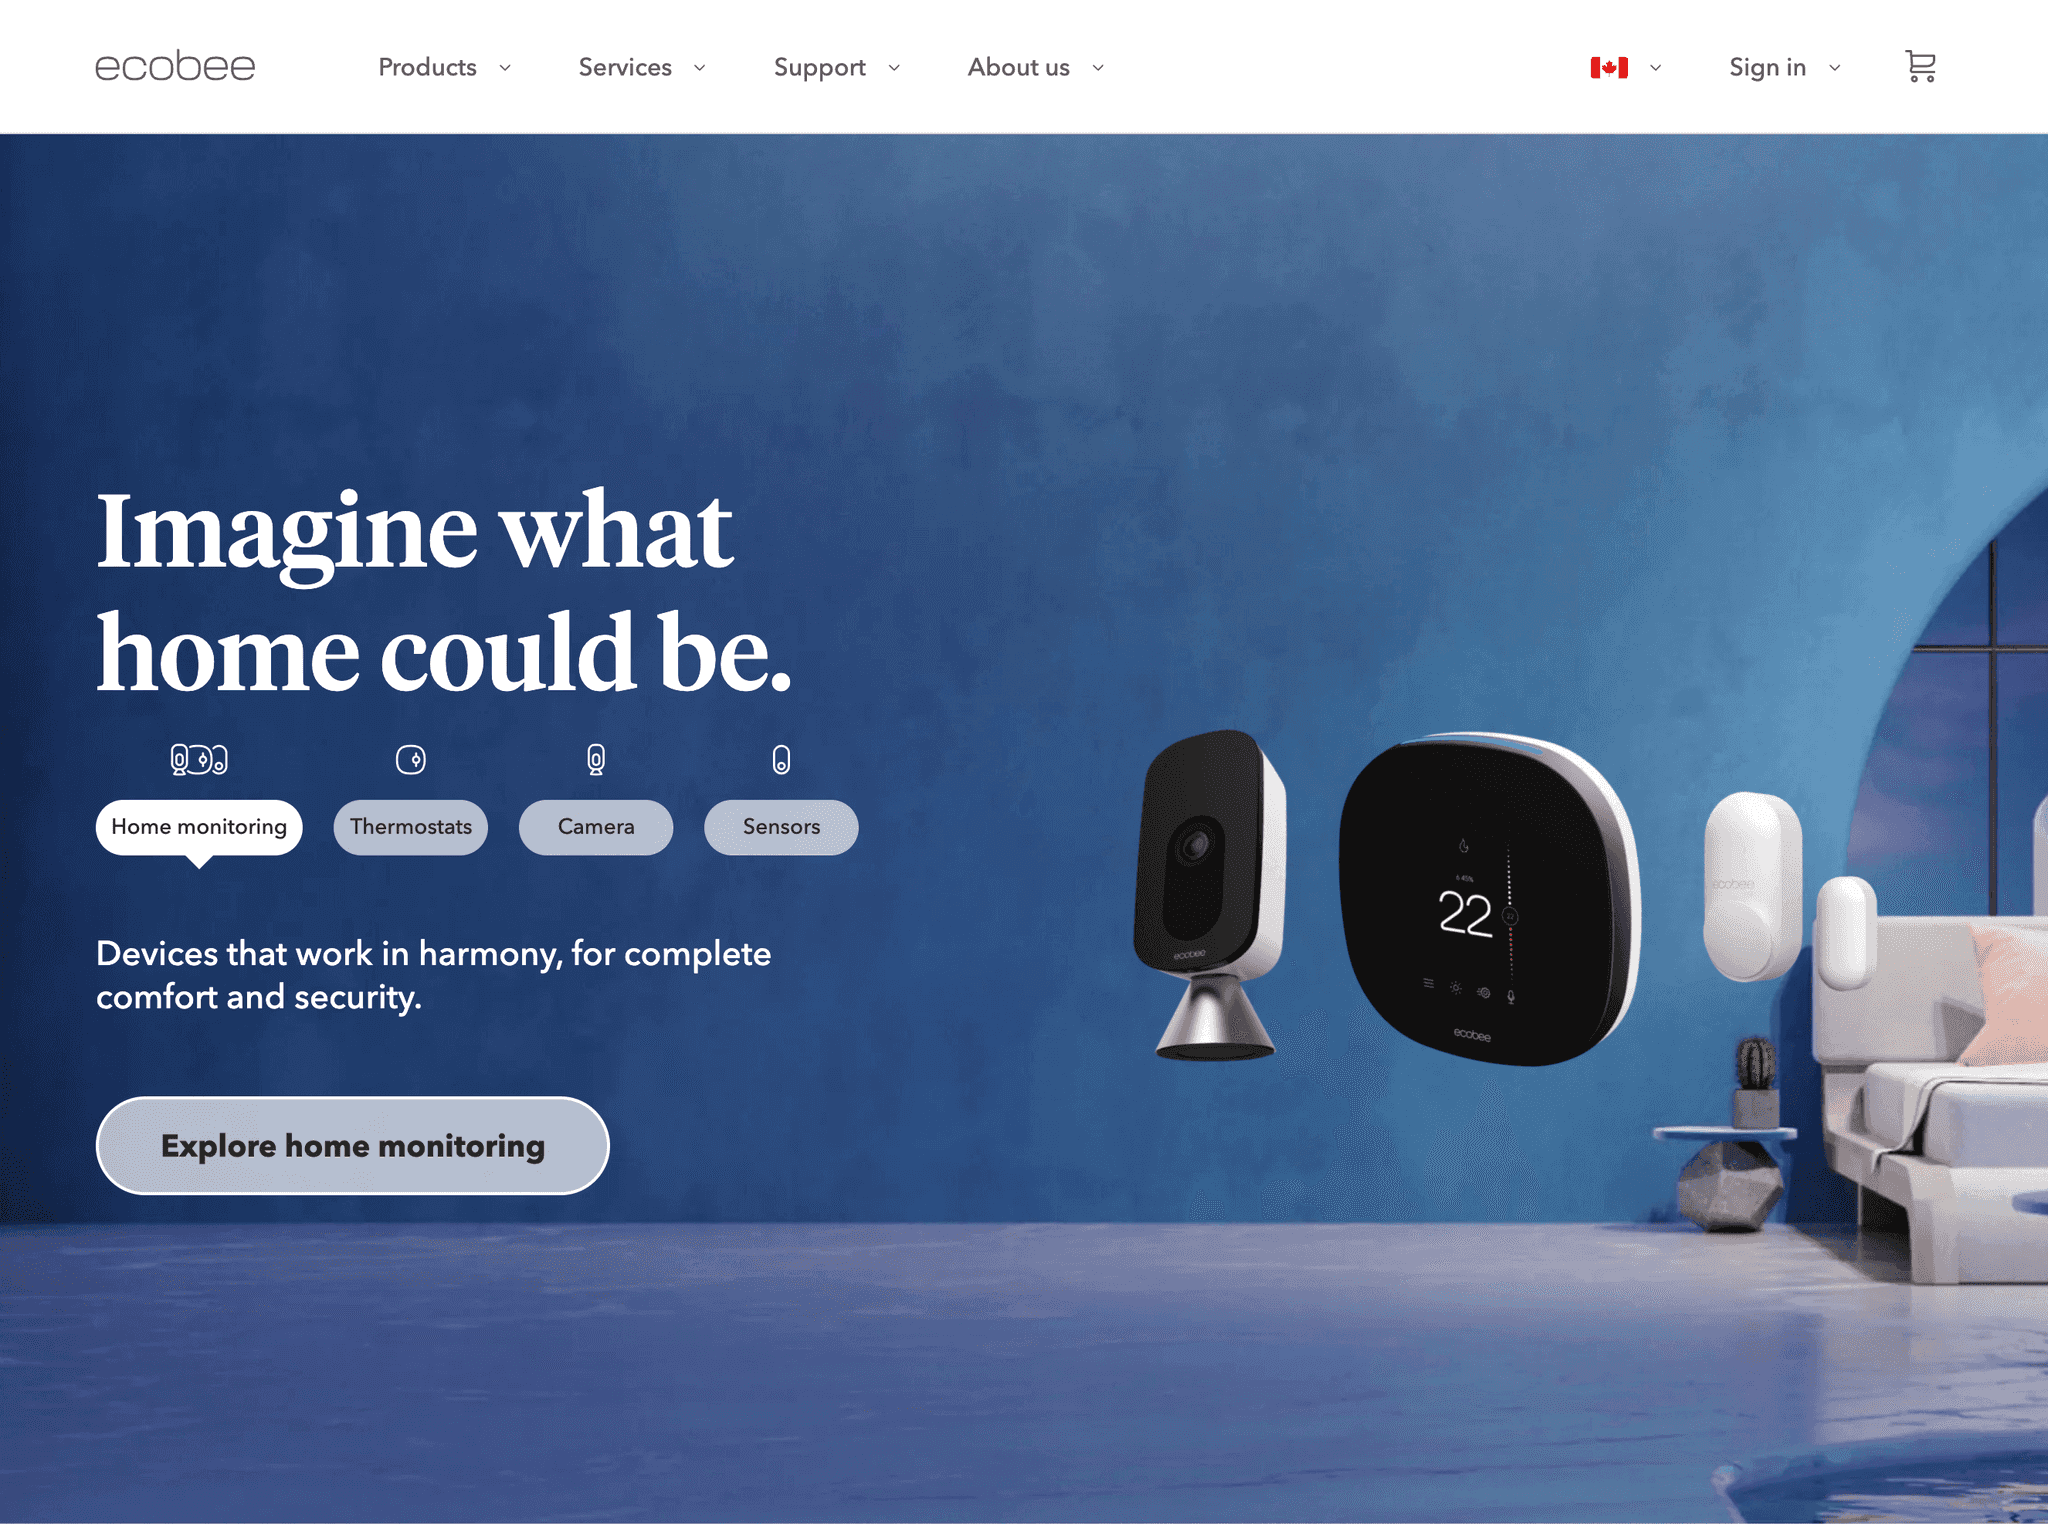 An identical-looking screenshot of the top section of the staging version of ecobee.com, showing an image of a Smart Camera, Smart Thermostat, and two Smart Sensors next to the words, "Imagine what could be".